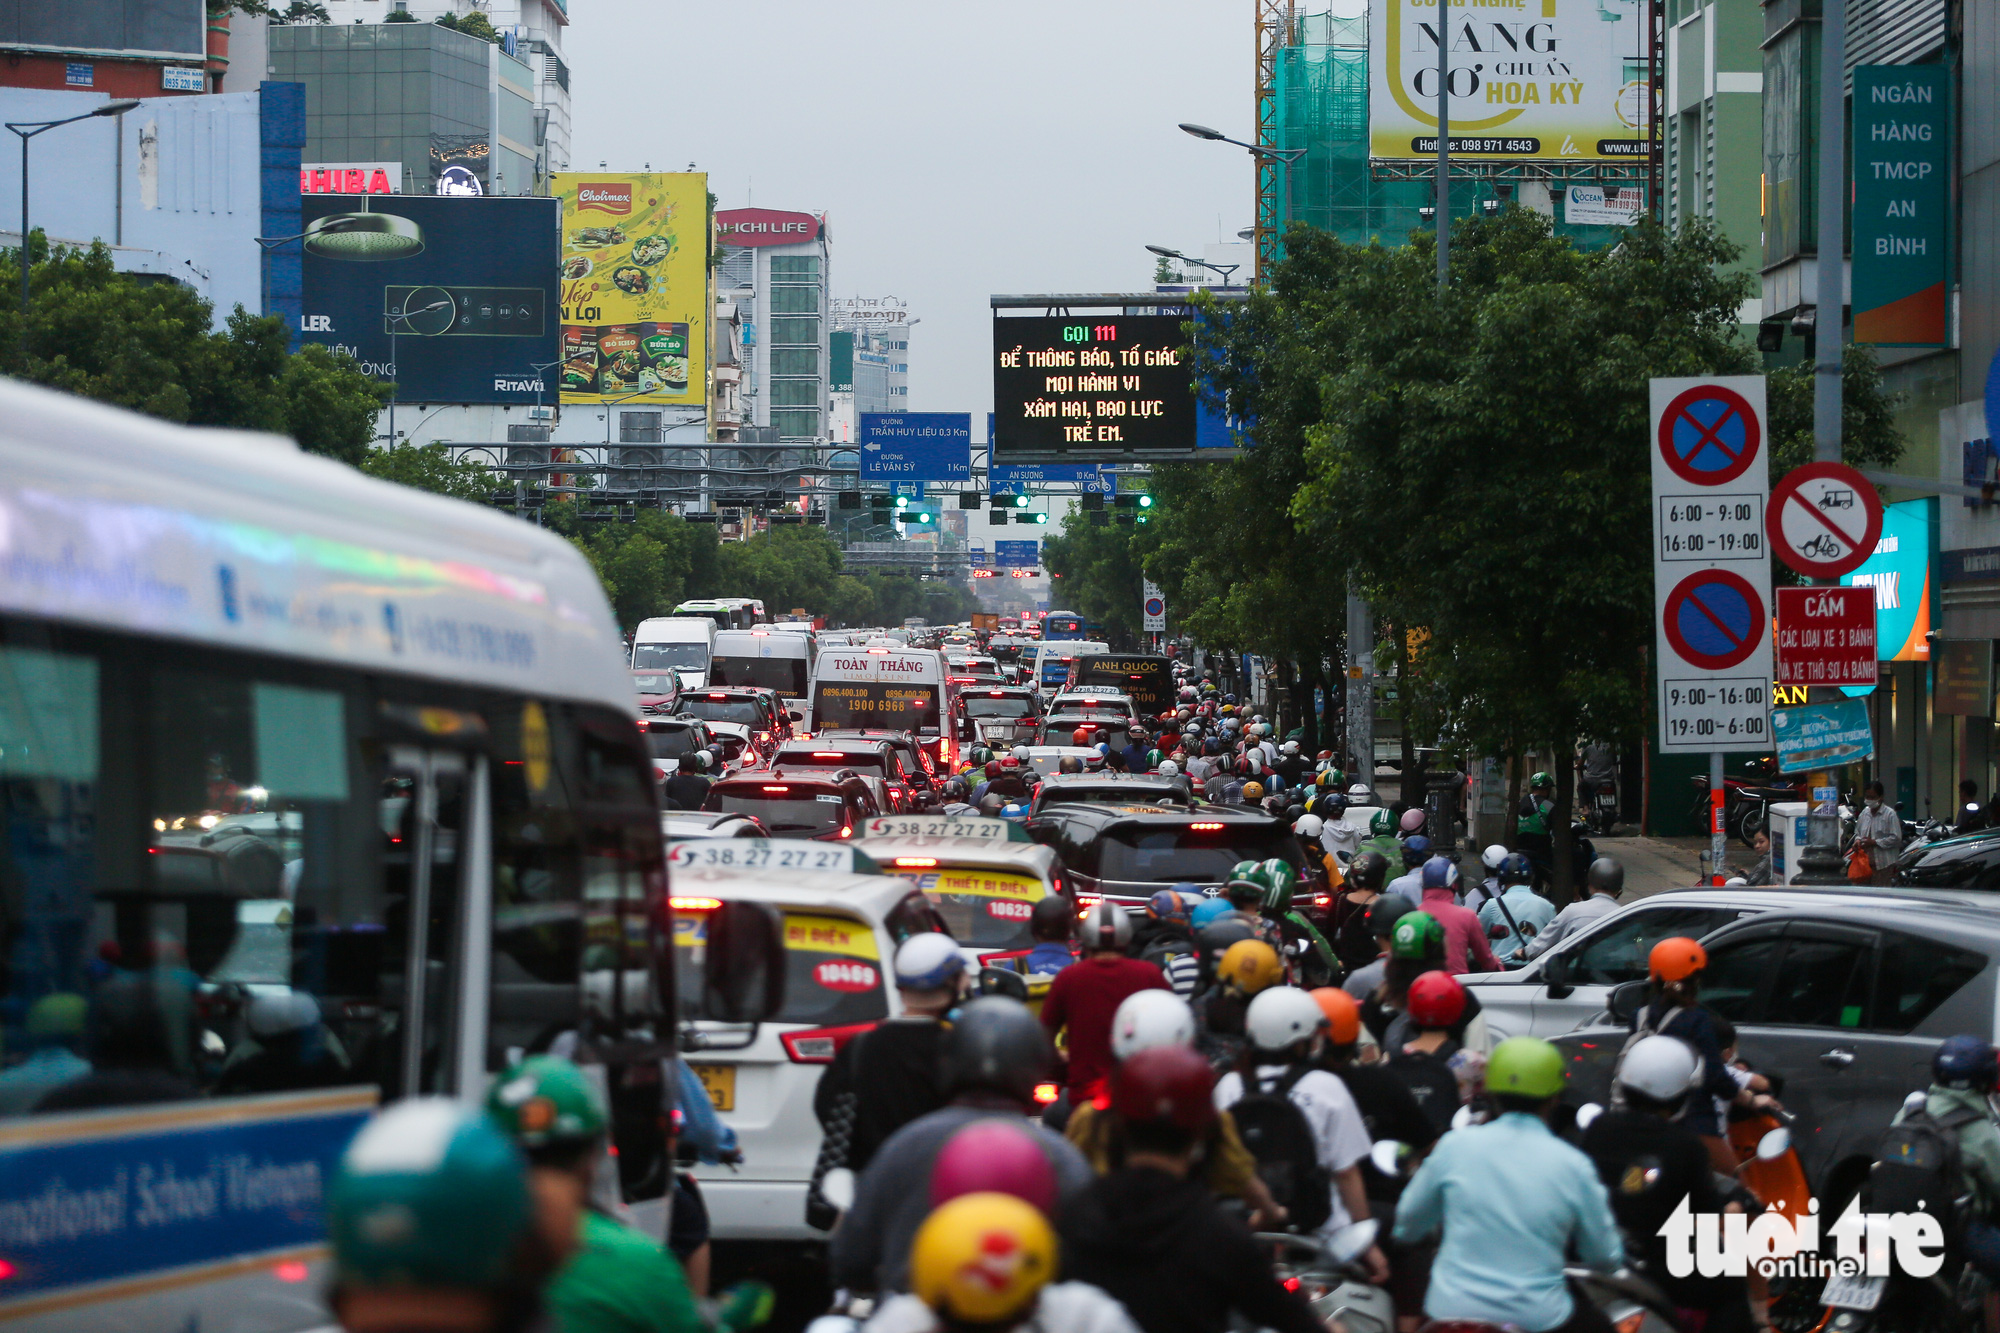 Congestion occurs on a route leading to Tan Son Nhat airport in Ho Chi Minh City. Photo: Chau Tuan / Tuoi Tre